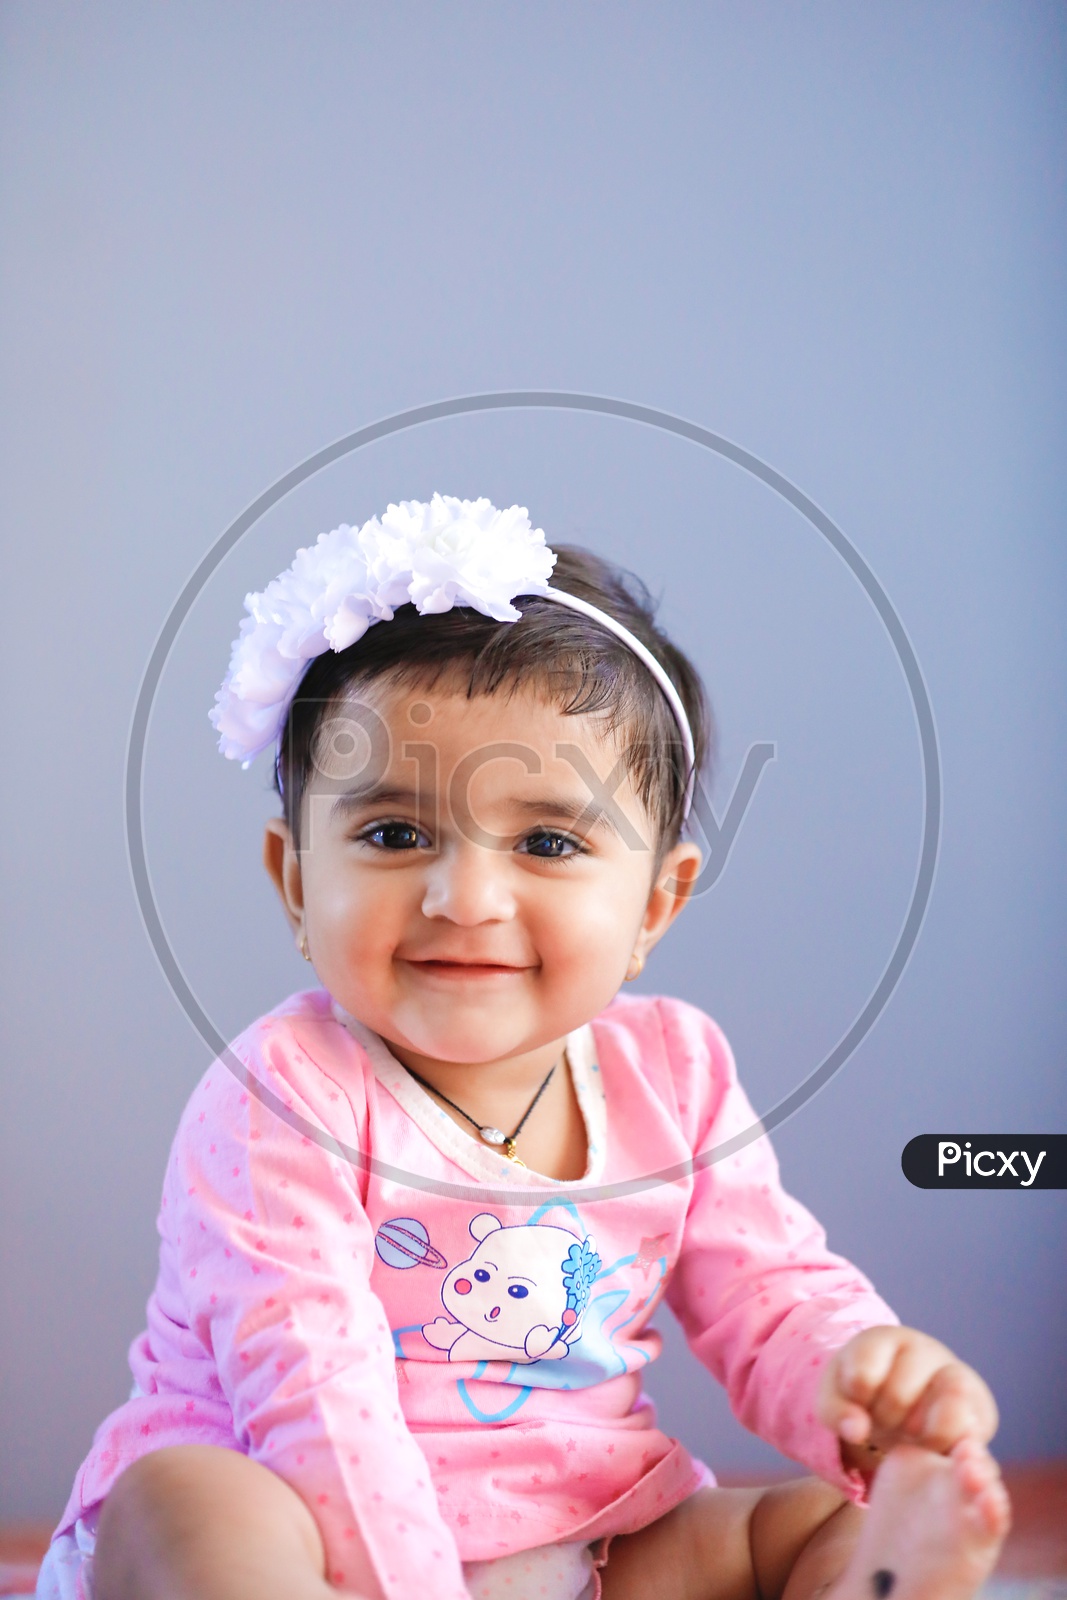 Image of Cute Indian Baby Girl With Smiling Face On an Isolated ...